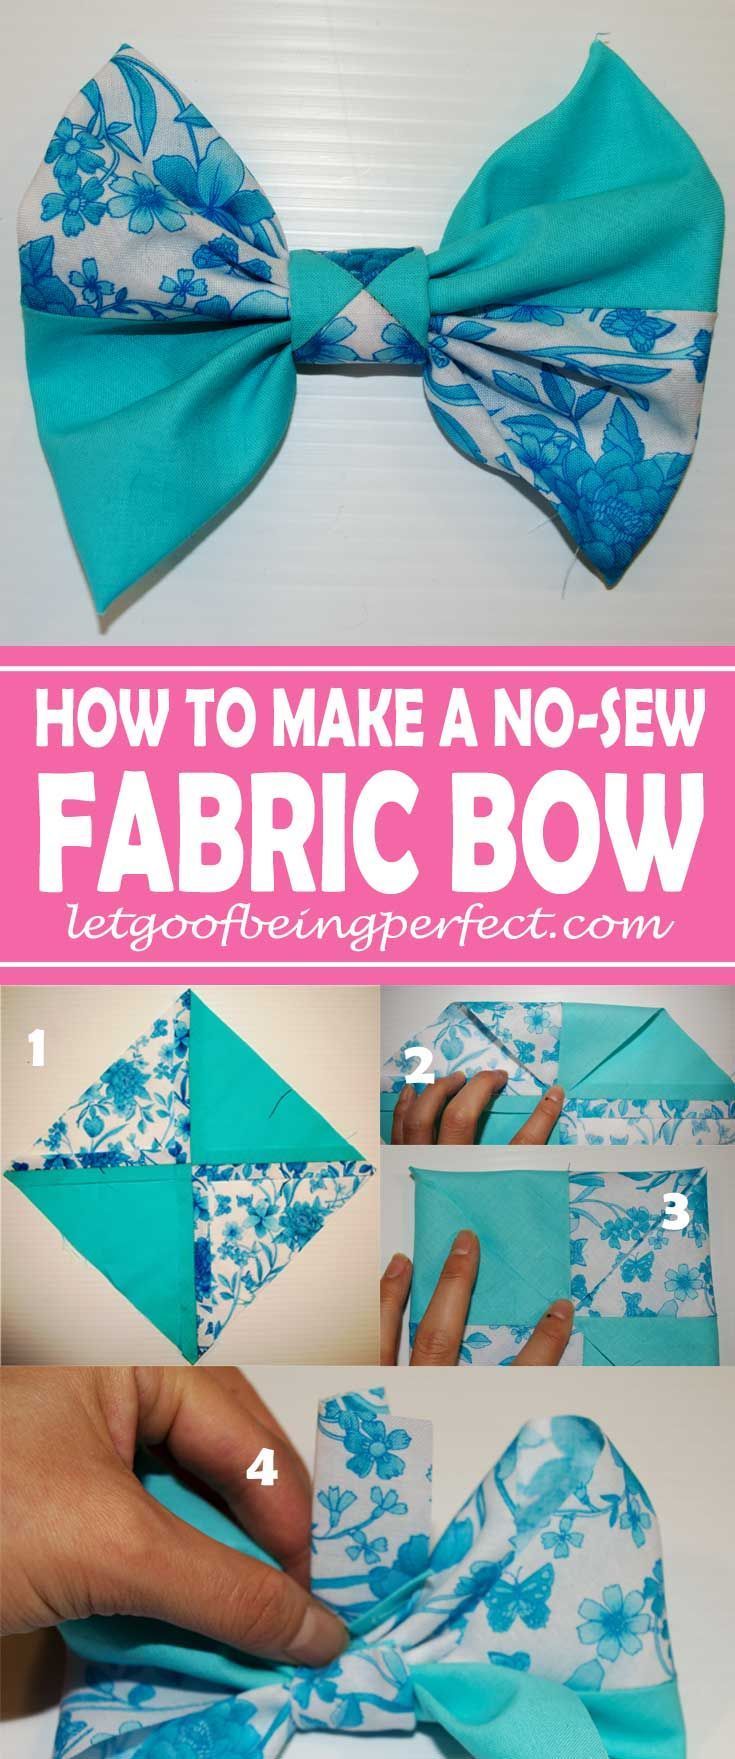 Making Fabric Bows ... Bows, Bows, Bows Everywhere -   22 fabric crafts No Sew scrap ideas